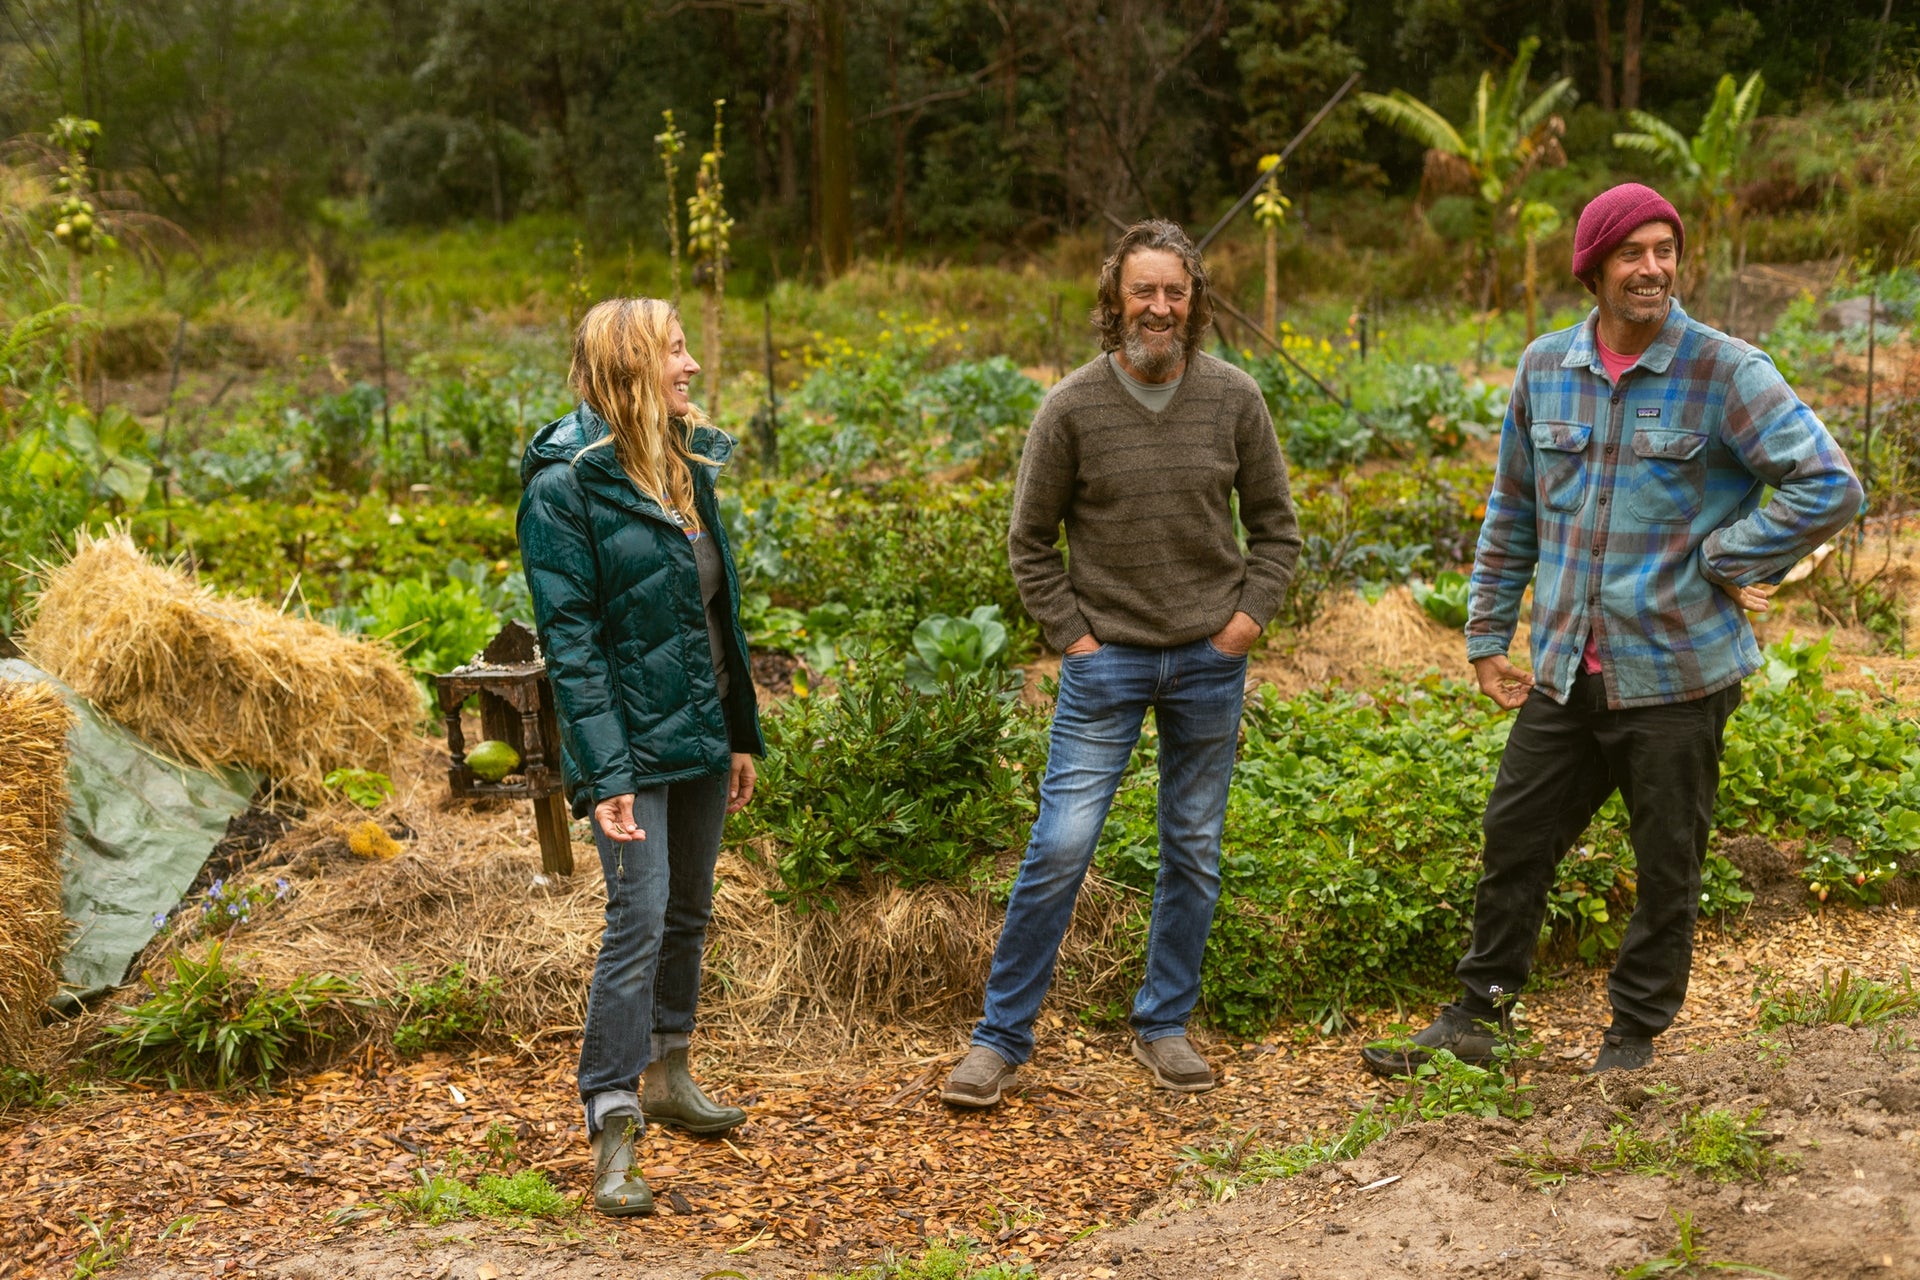 Lauren Hill and Dave Rastovich standing with Geoff Lawton (centre) in their community permaculture garden on the NSW North Coast. Photo: Nathan Oldfield